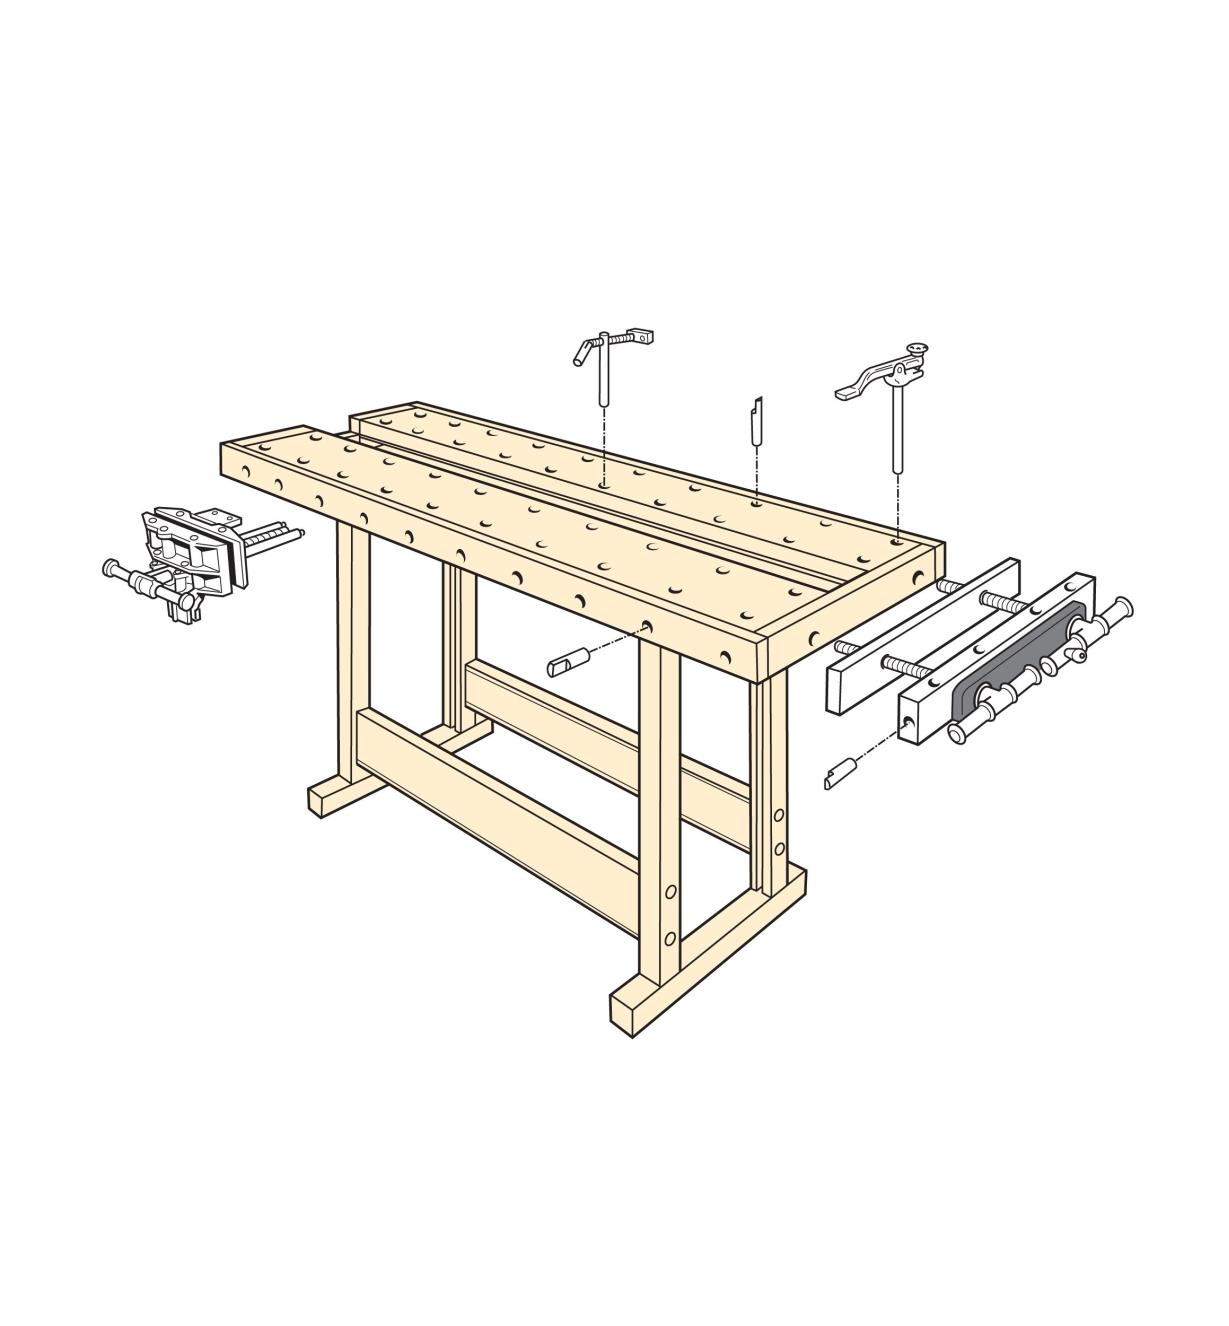 Illustrated example of completed Veritas Workbench 